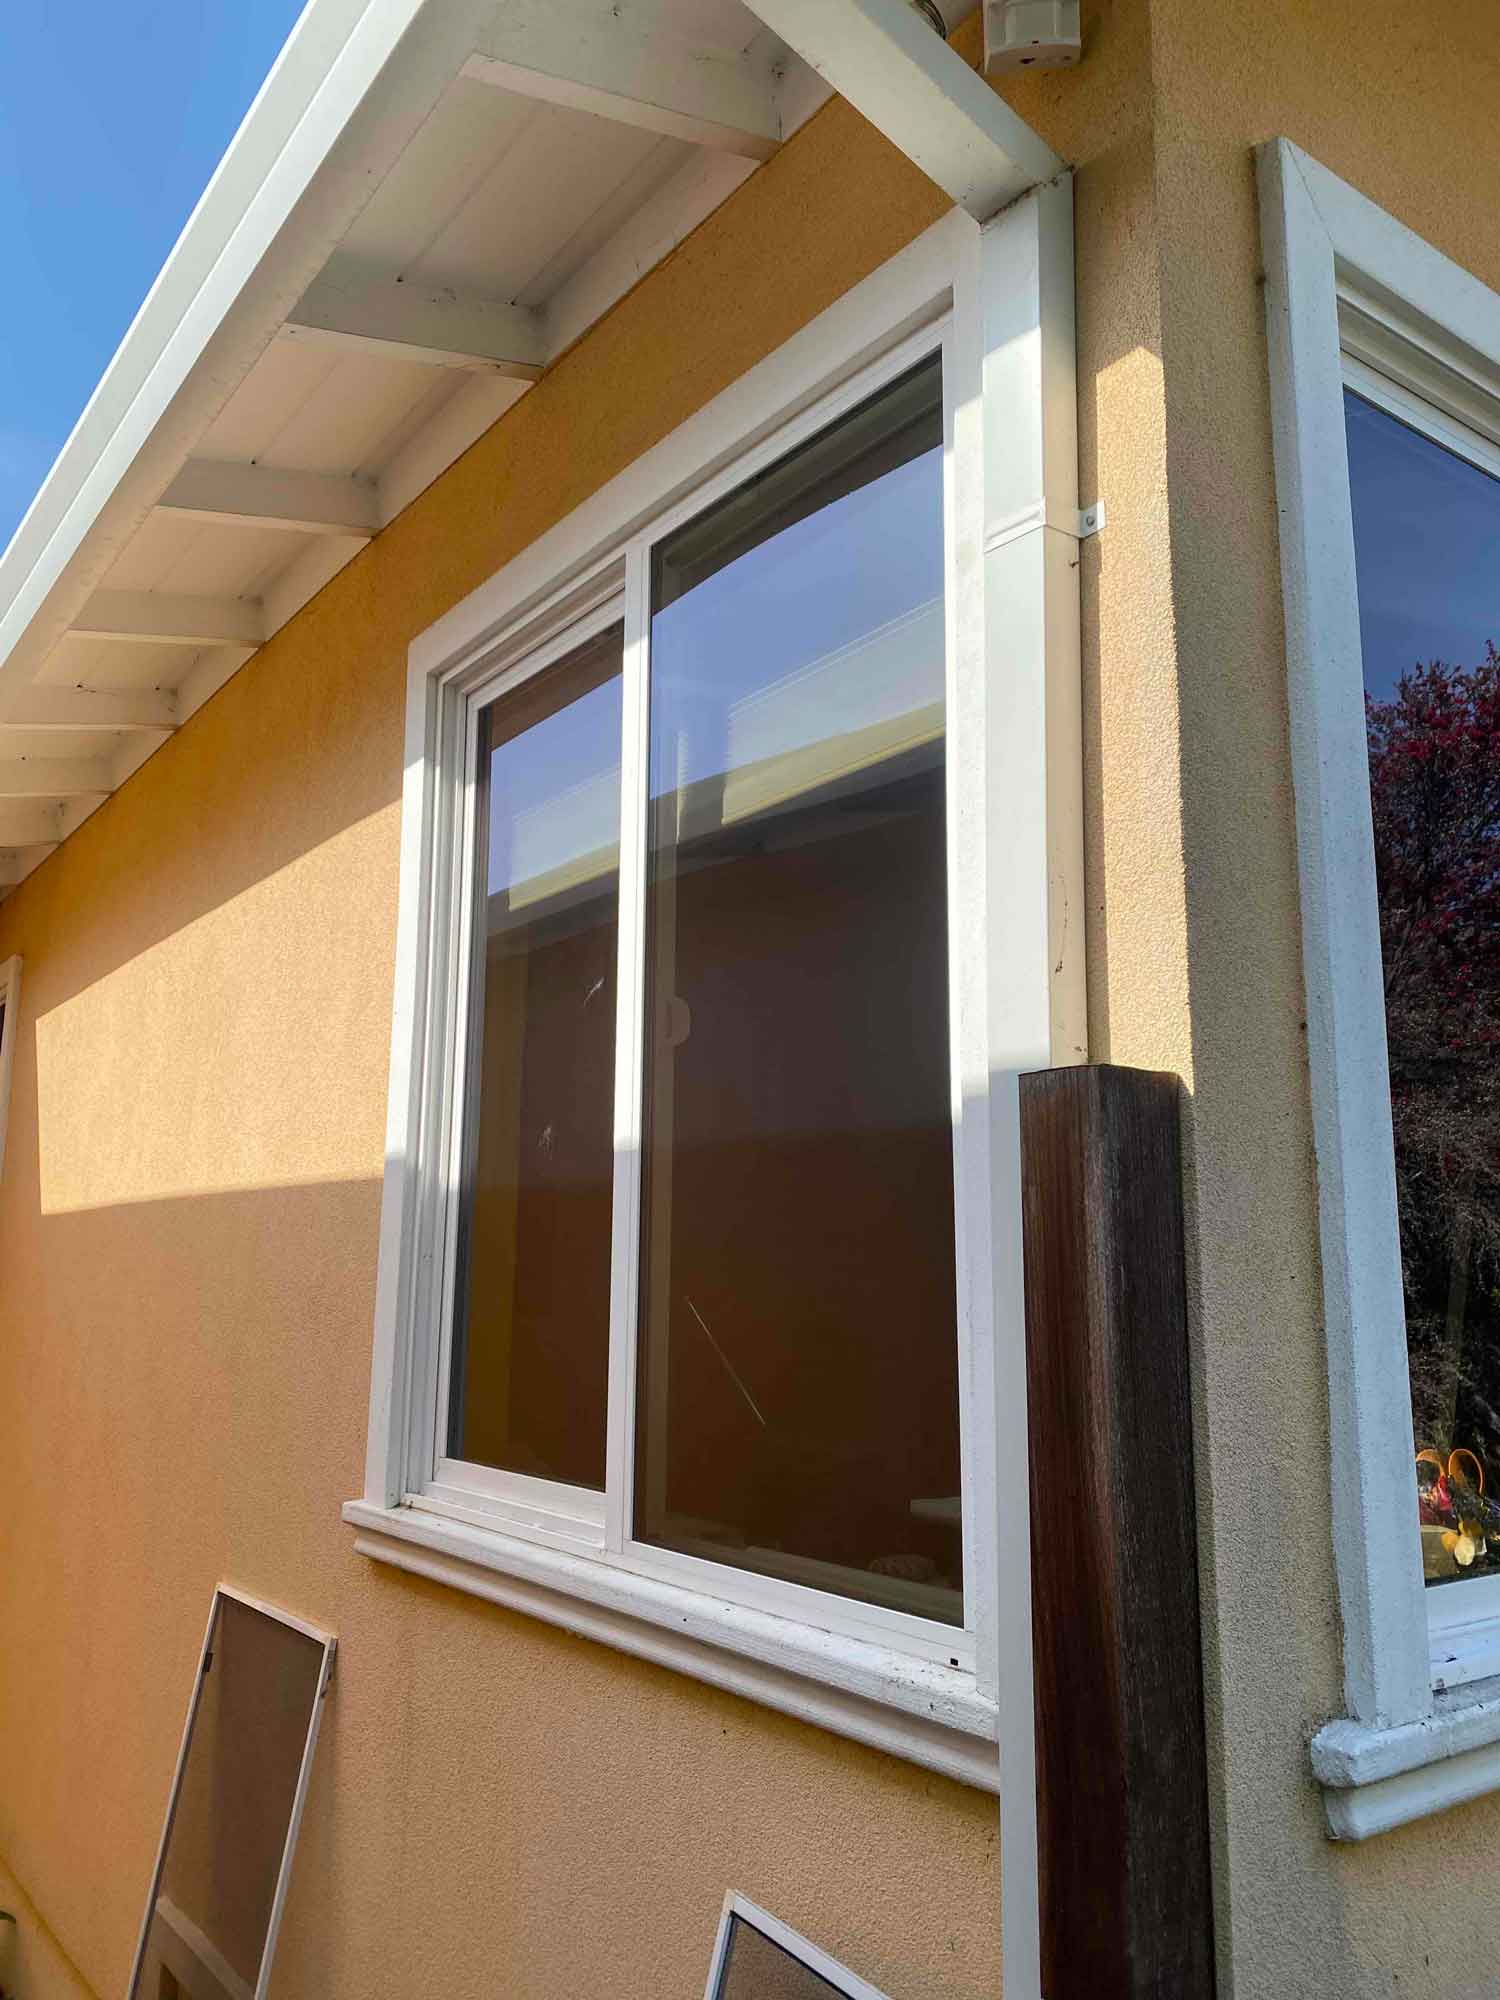 The ClimatePro team recently installed 3M Prestige Exterior Window Tint on this home in San Anselmo, CA